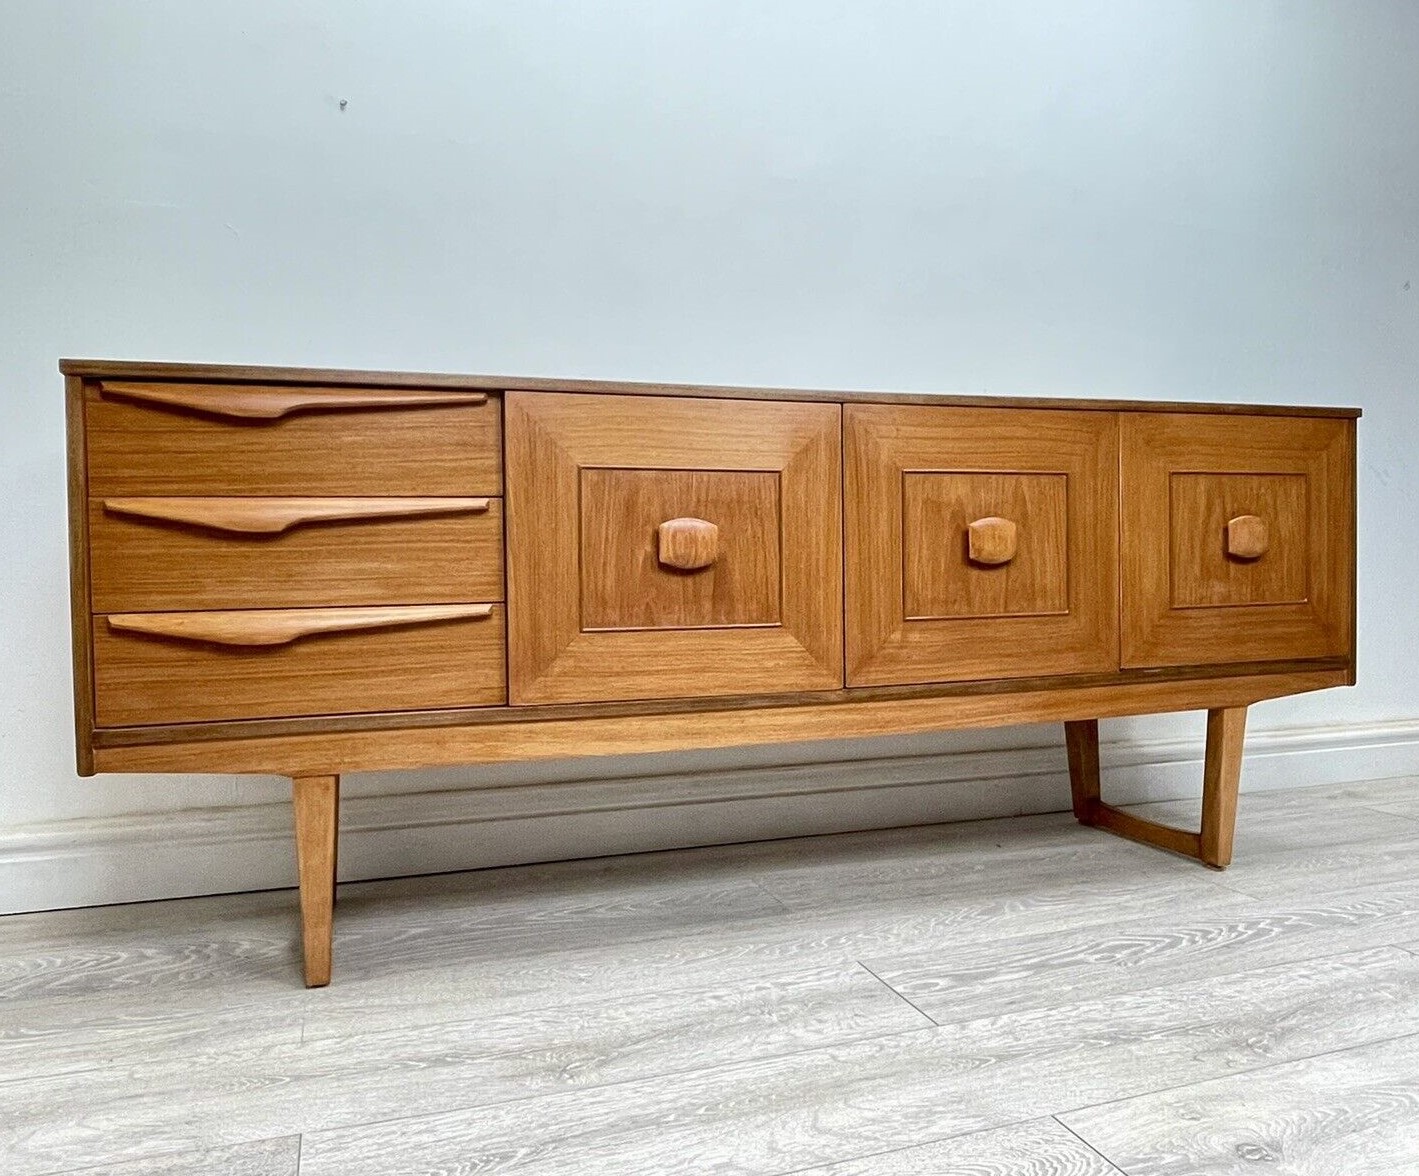 Stonehill 'Statesman' Mid Century Modern Teak Sideboard. Town and Country Antiques